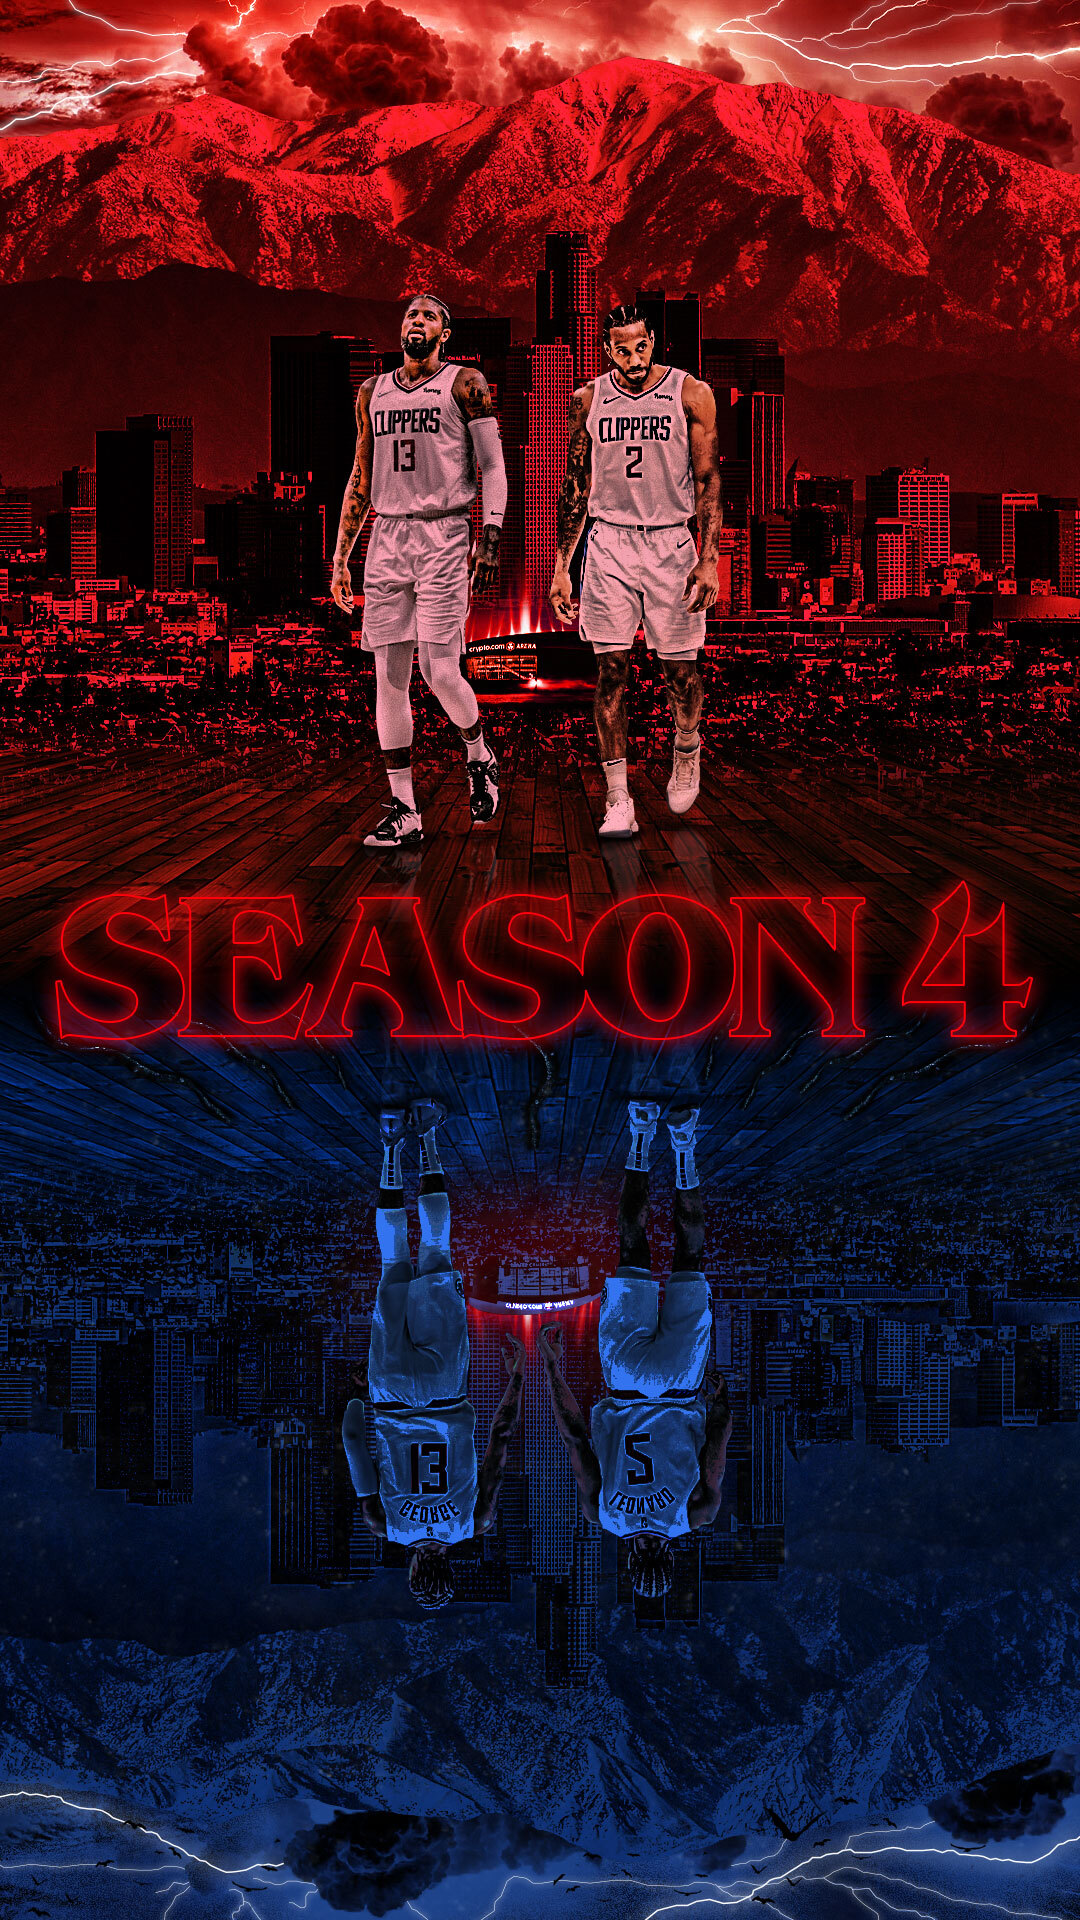 LA Clippers 4: The Clippers in the Upside Down